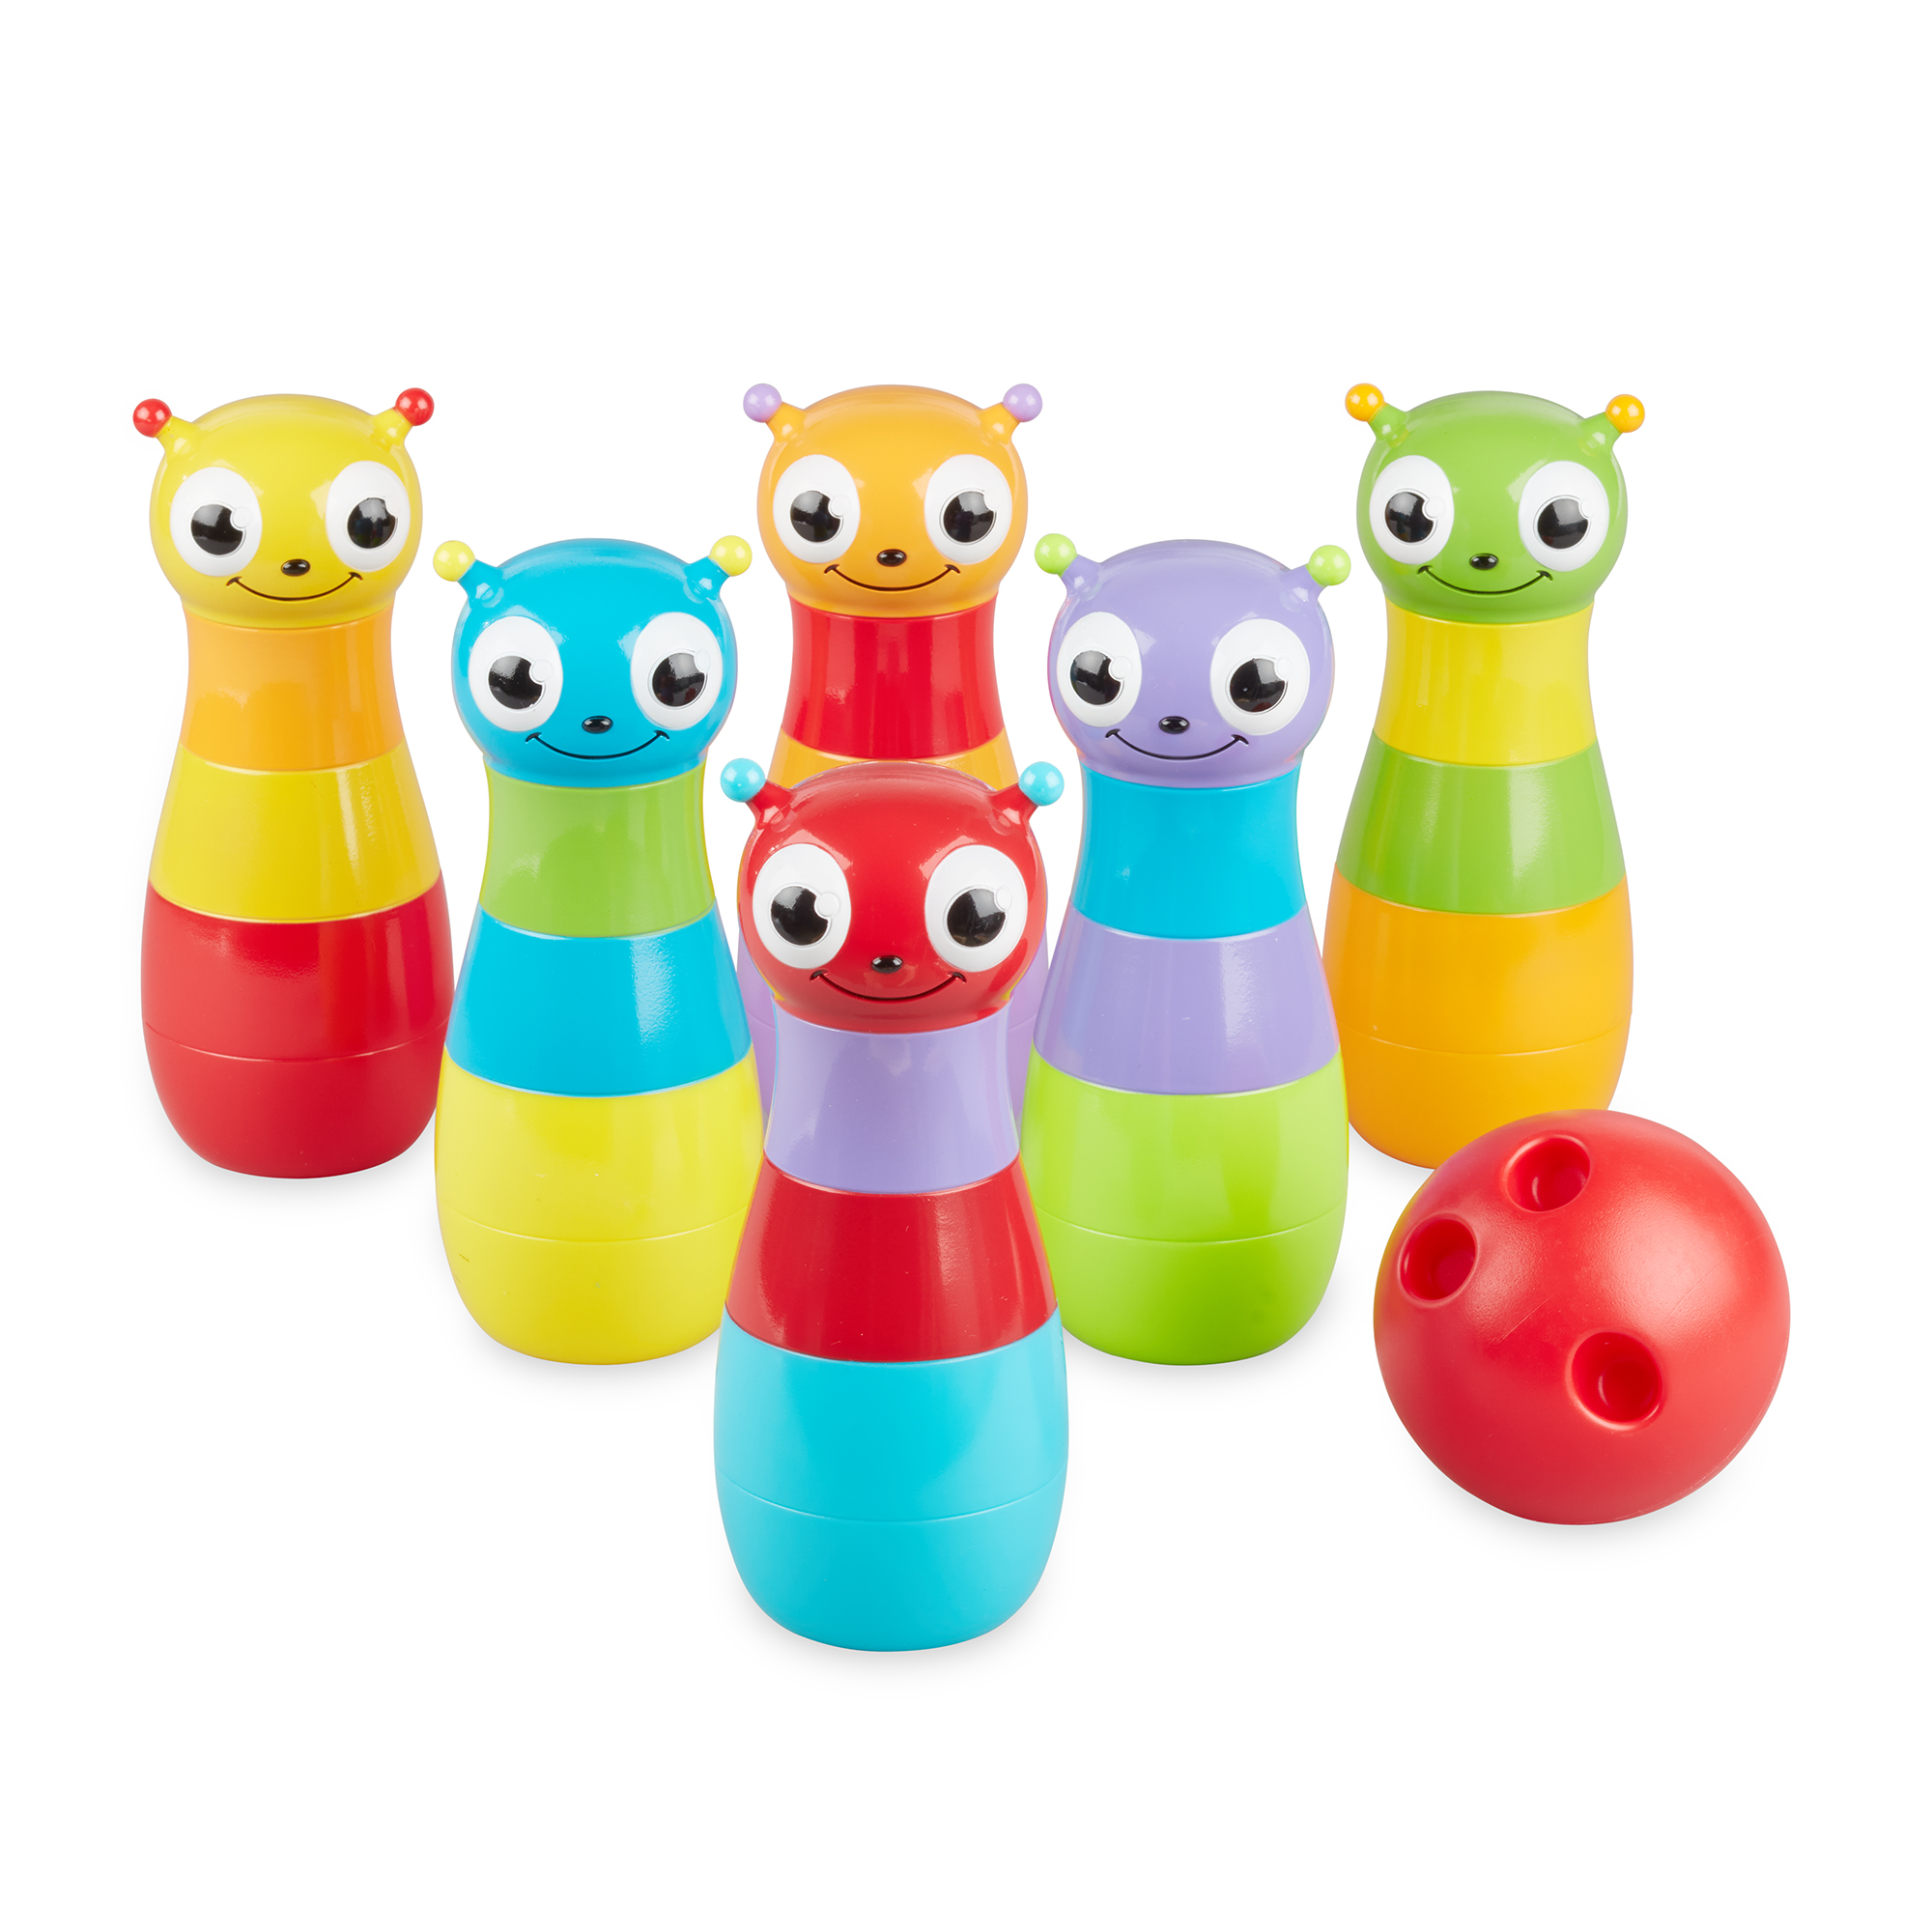 Melissa & Doug Cute as a Bug Bowling Set Kids Indoor Outdoor Game (8 Pcs) - image 1 of 9